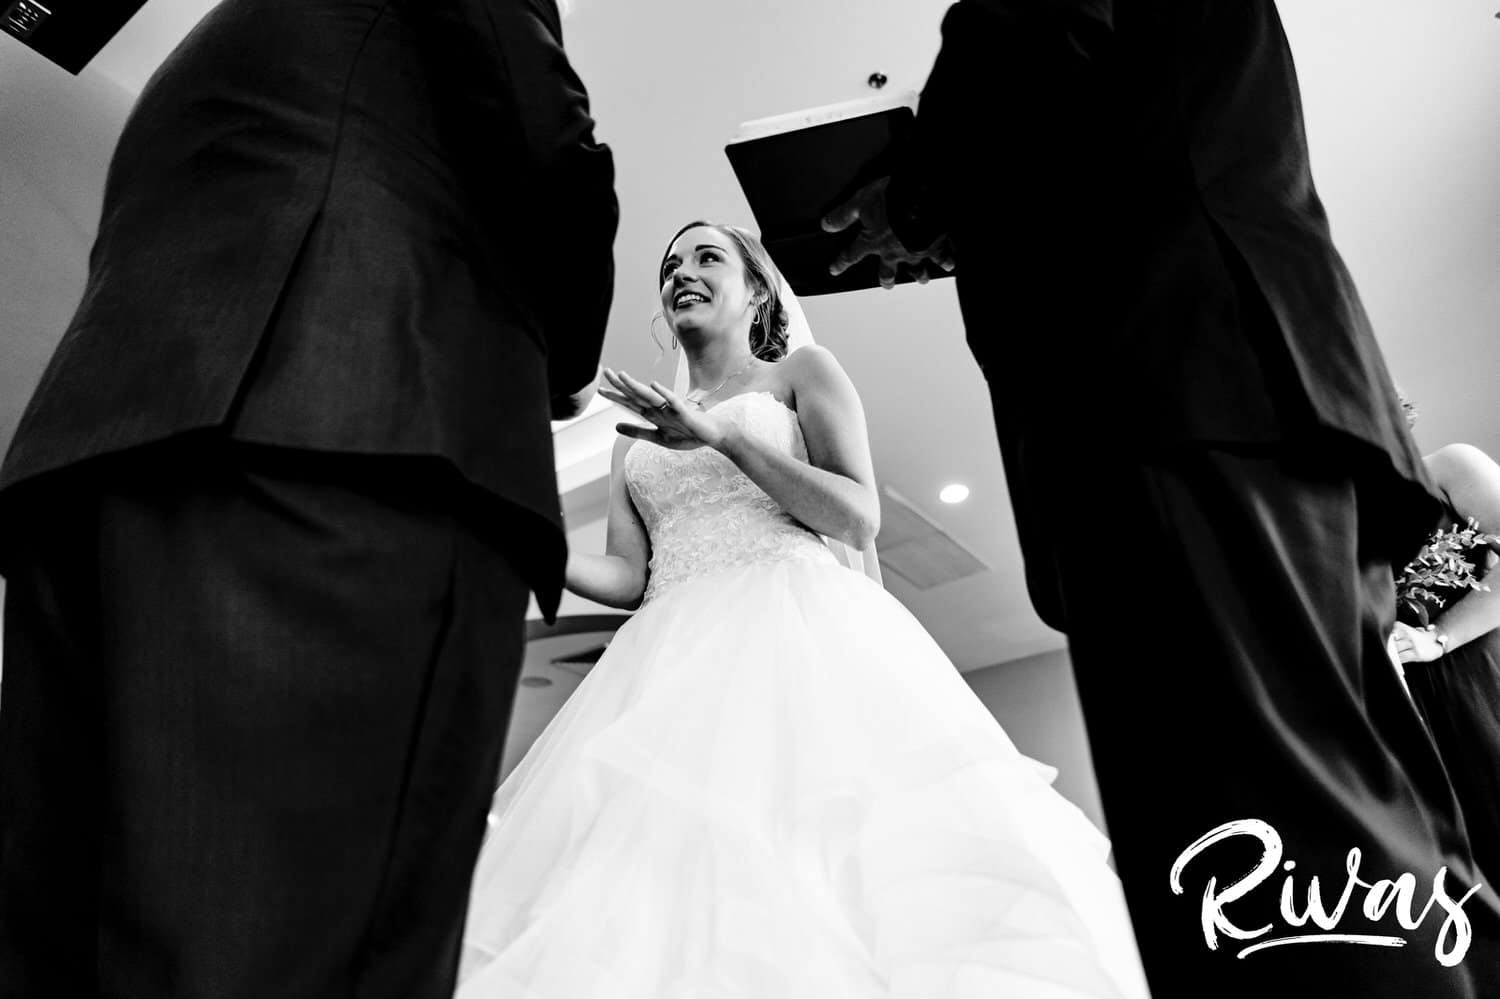 A candid black and white picture taken from below of a groom putting a wedding band on a bride's finger during their wedding ceremony at Piazza Messina. 